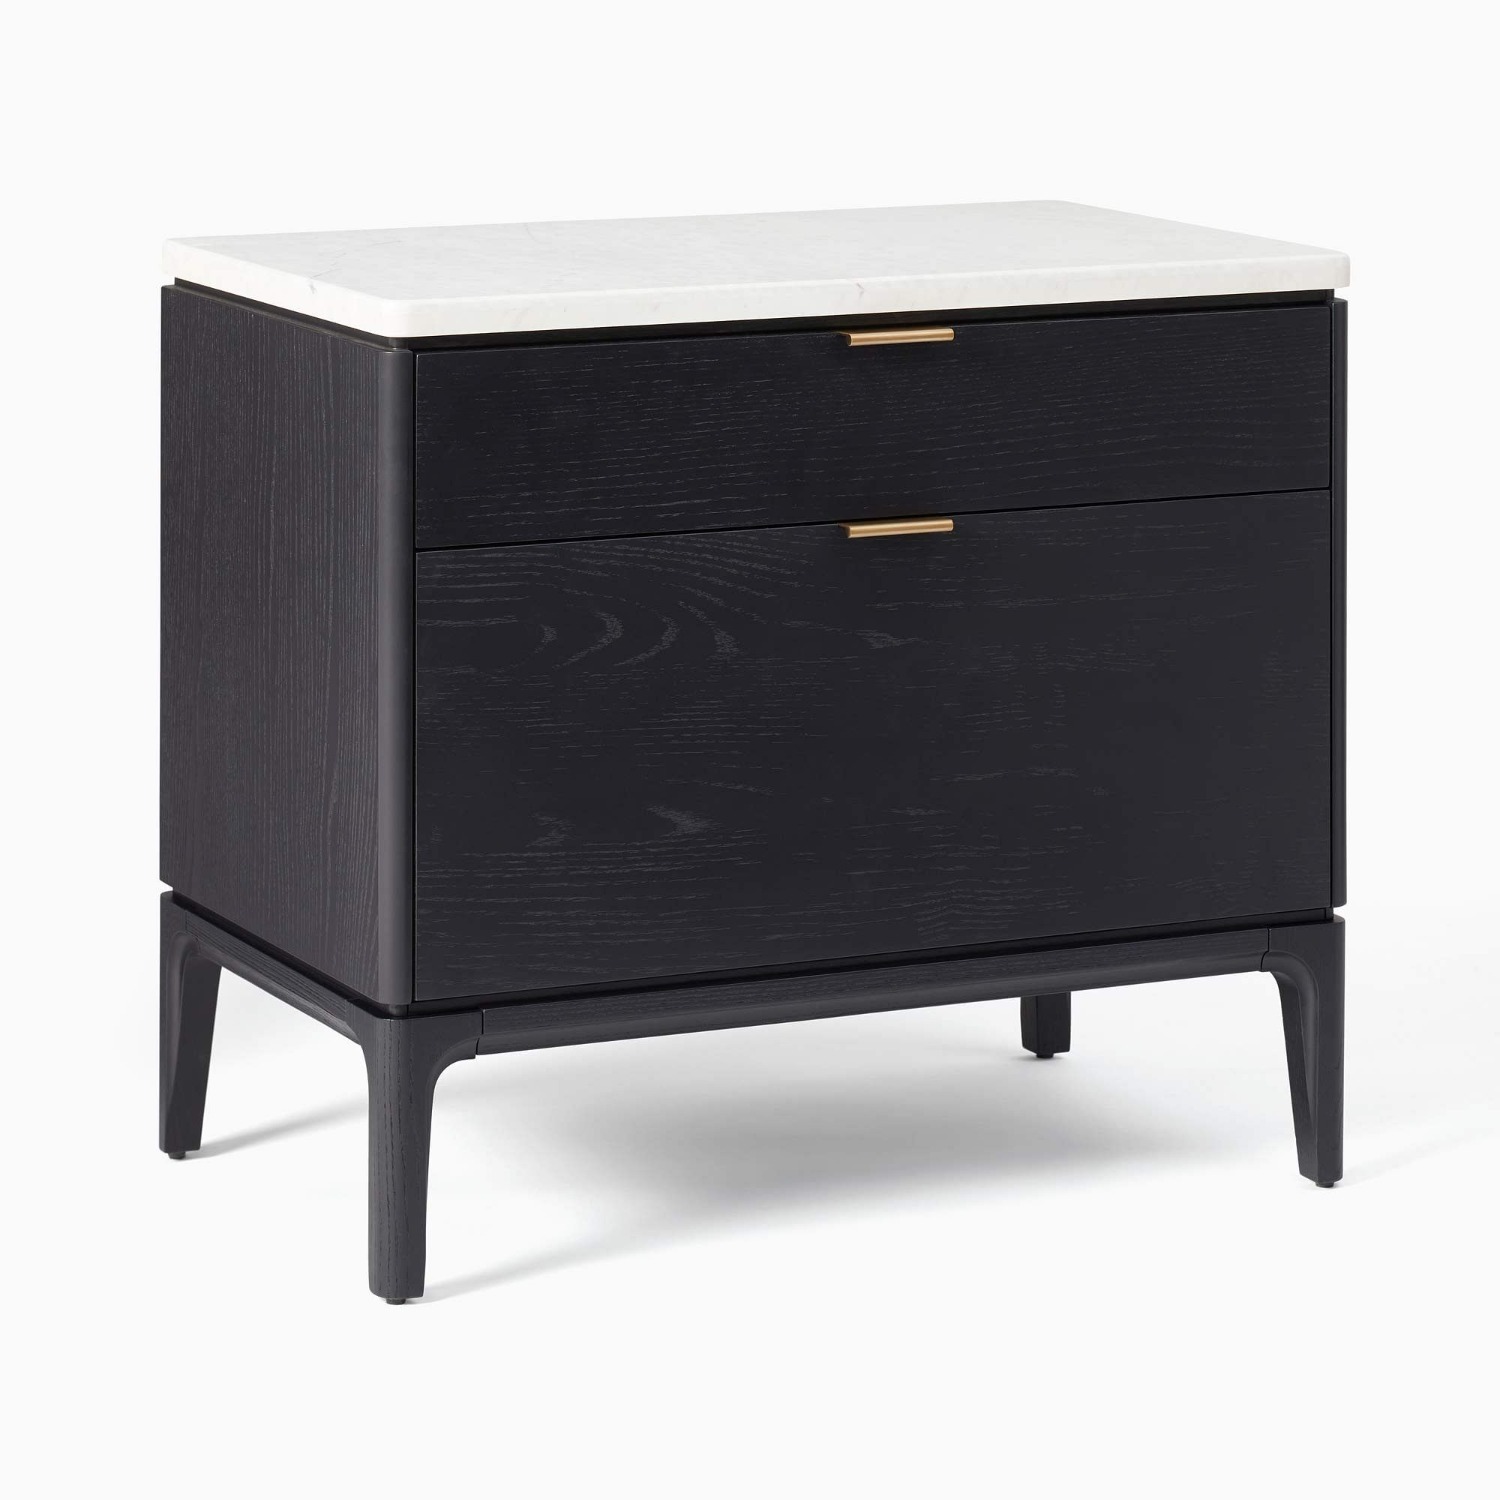 The Best West Elm Nightstands for Every Design Aesthetic插图4